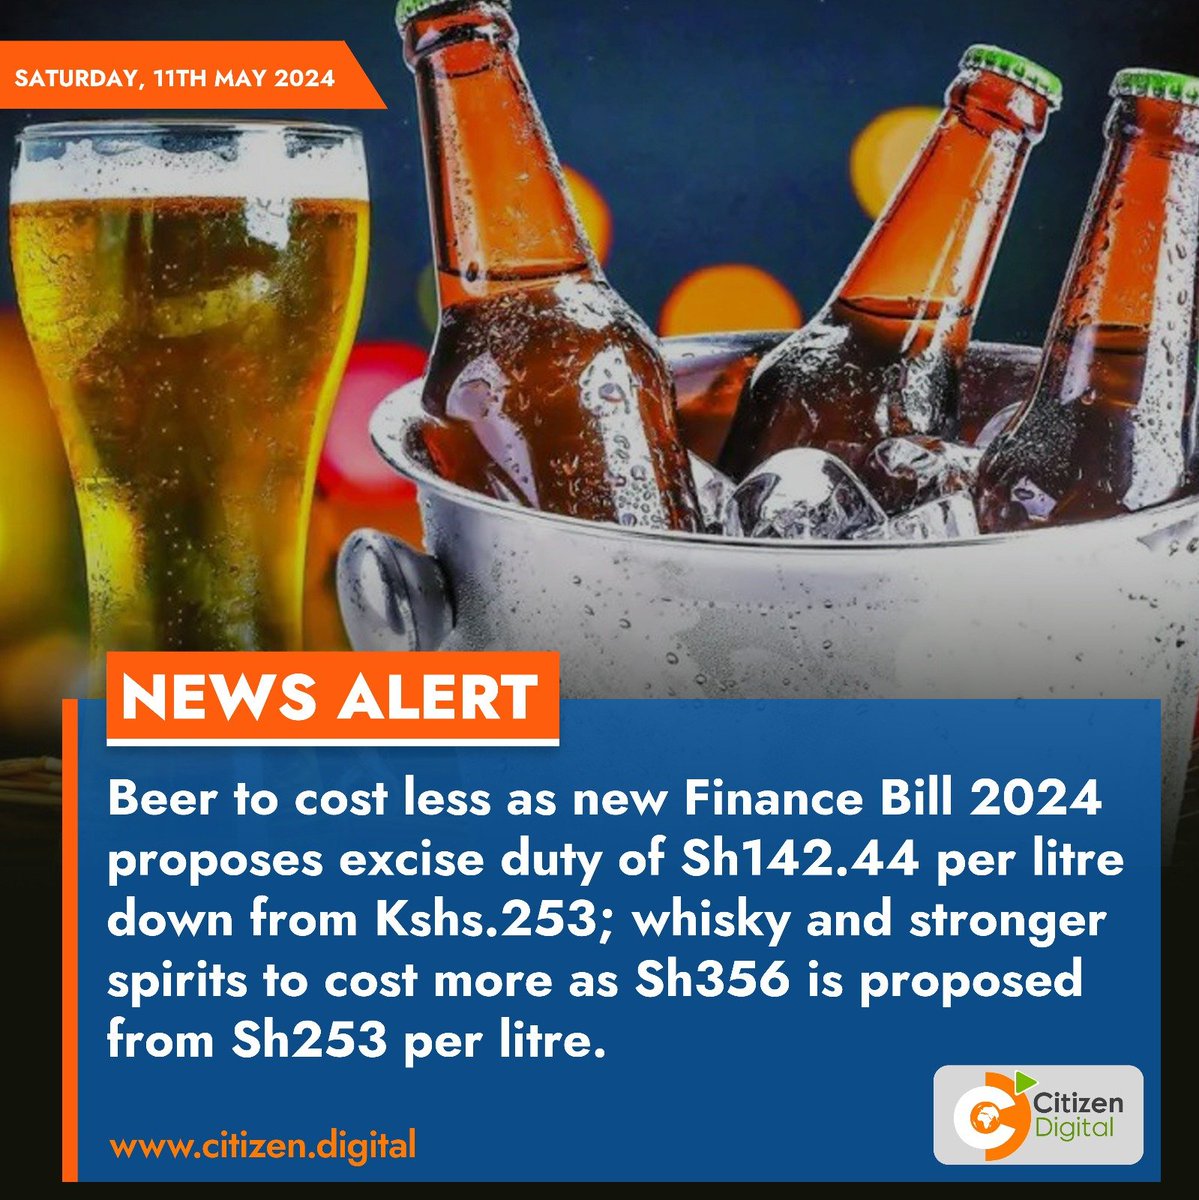 Beer to cost less as new Finance Bill 2024 proposes excise duty of Sh142.44 per litre down from Kshs.253; whisky and stronger spirits to cost more as Sh356 is proposed from Sh253 per litre.